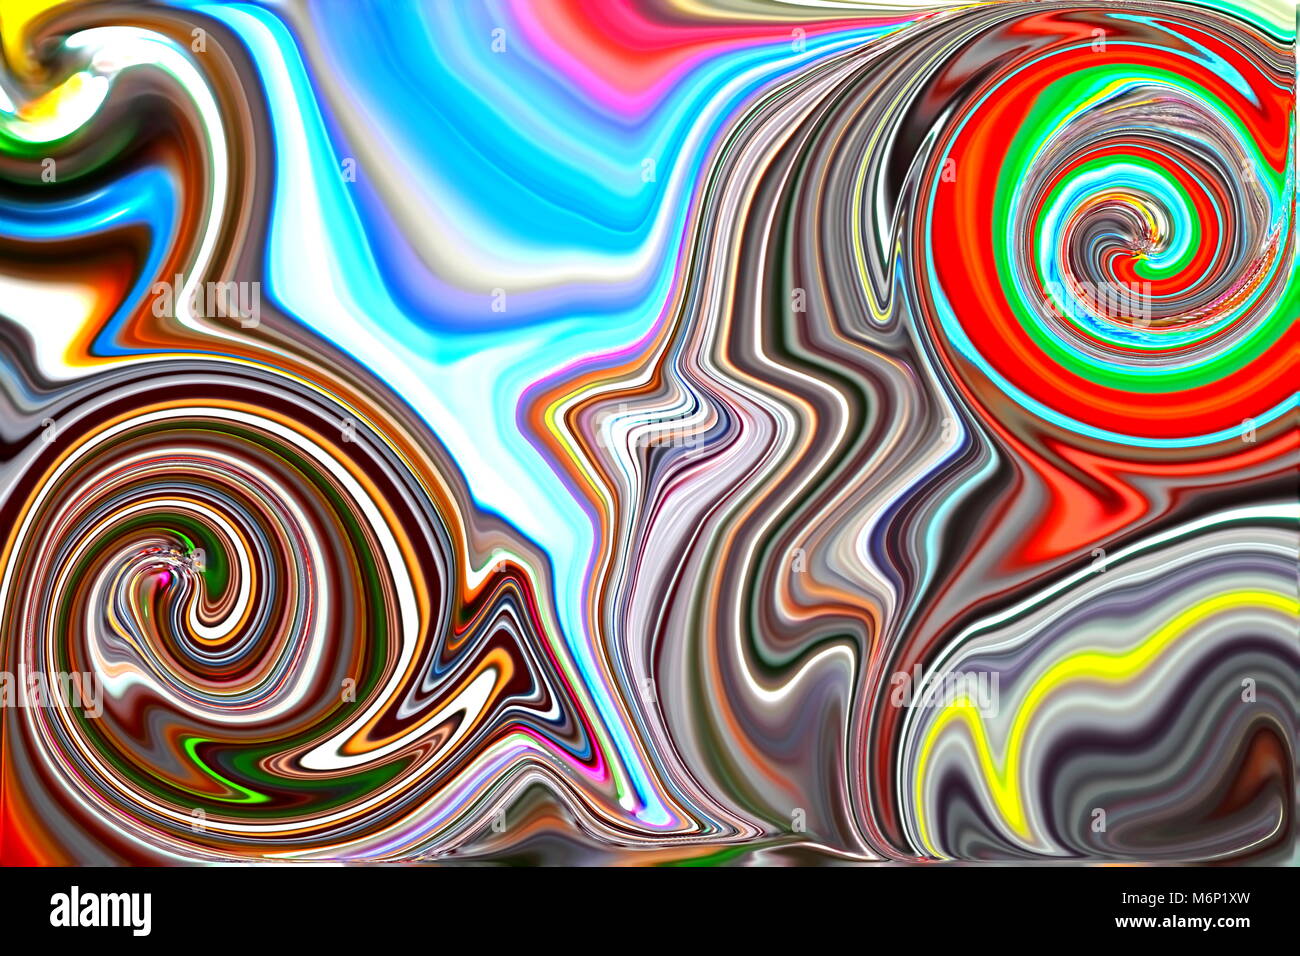 Bright fancy swirls and frilles . Stock Photo